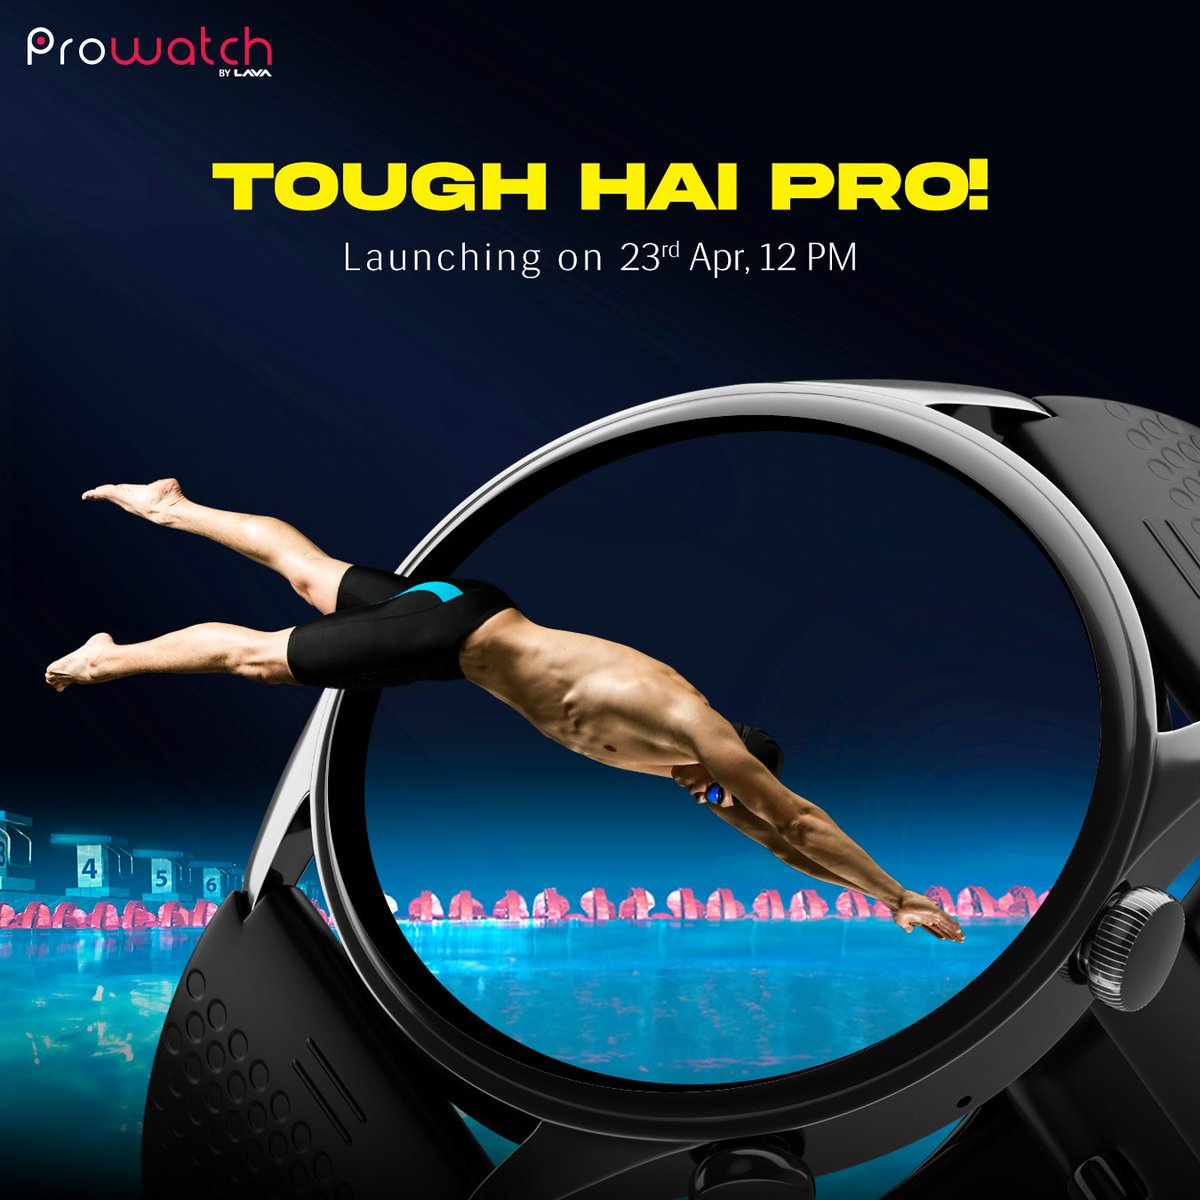 Prowatch: 3 days to go to witness the PRO league! It's time for PRO! Launching on 23rd April at 12 PM. Register now & Win*: bit.ly/4cRB0ol #ToughHaiPro #ProWatch #Prozone